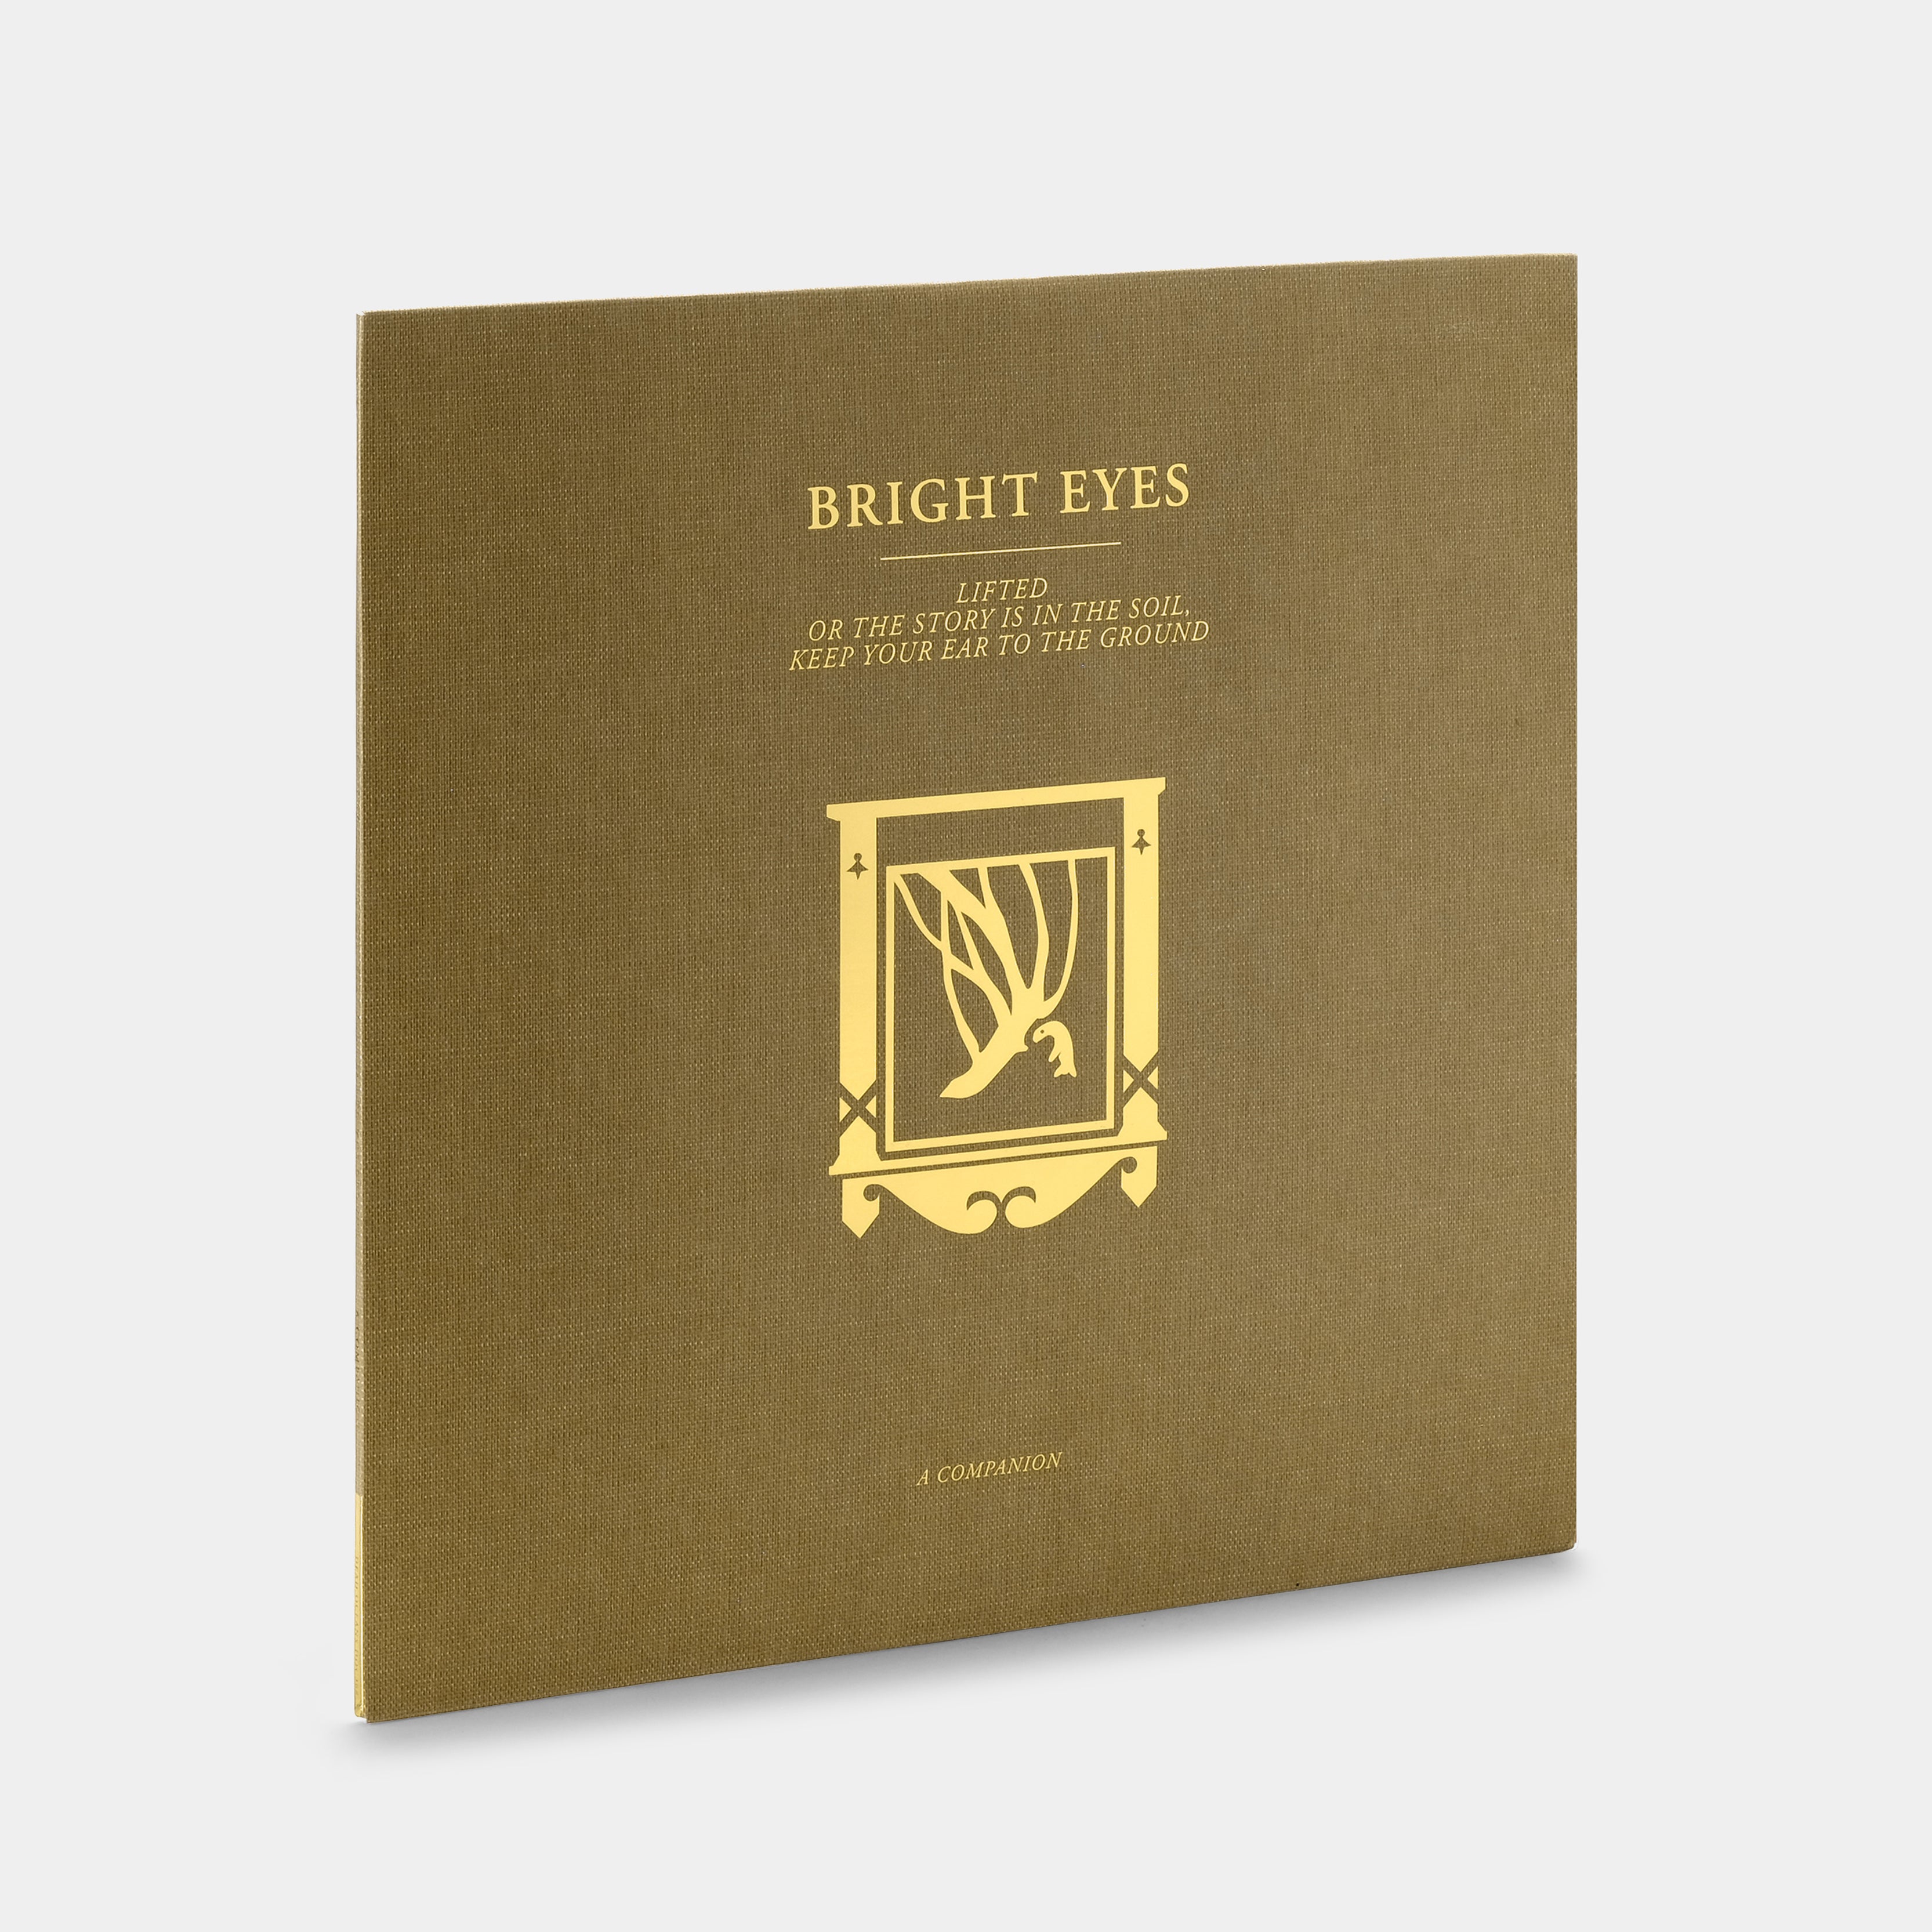 Bright Eyes - Lifted Or The Story Is In The Soil, Keep Your Ear To The Ground (A Companion) EP Gold Vinyl Record